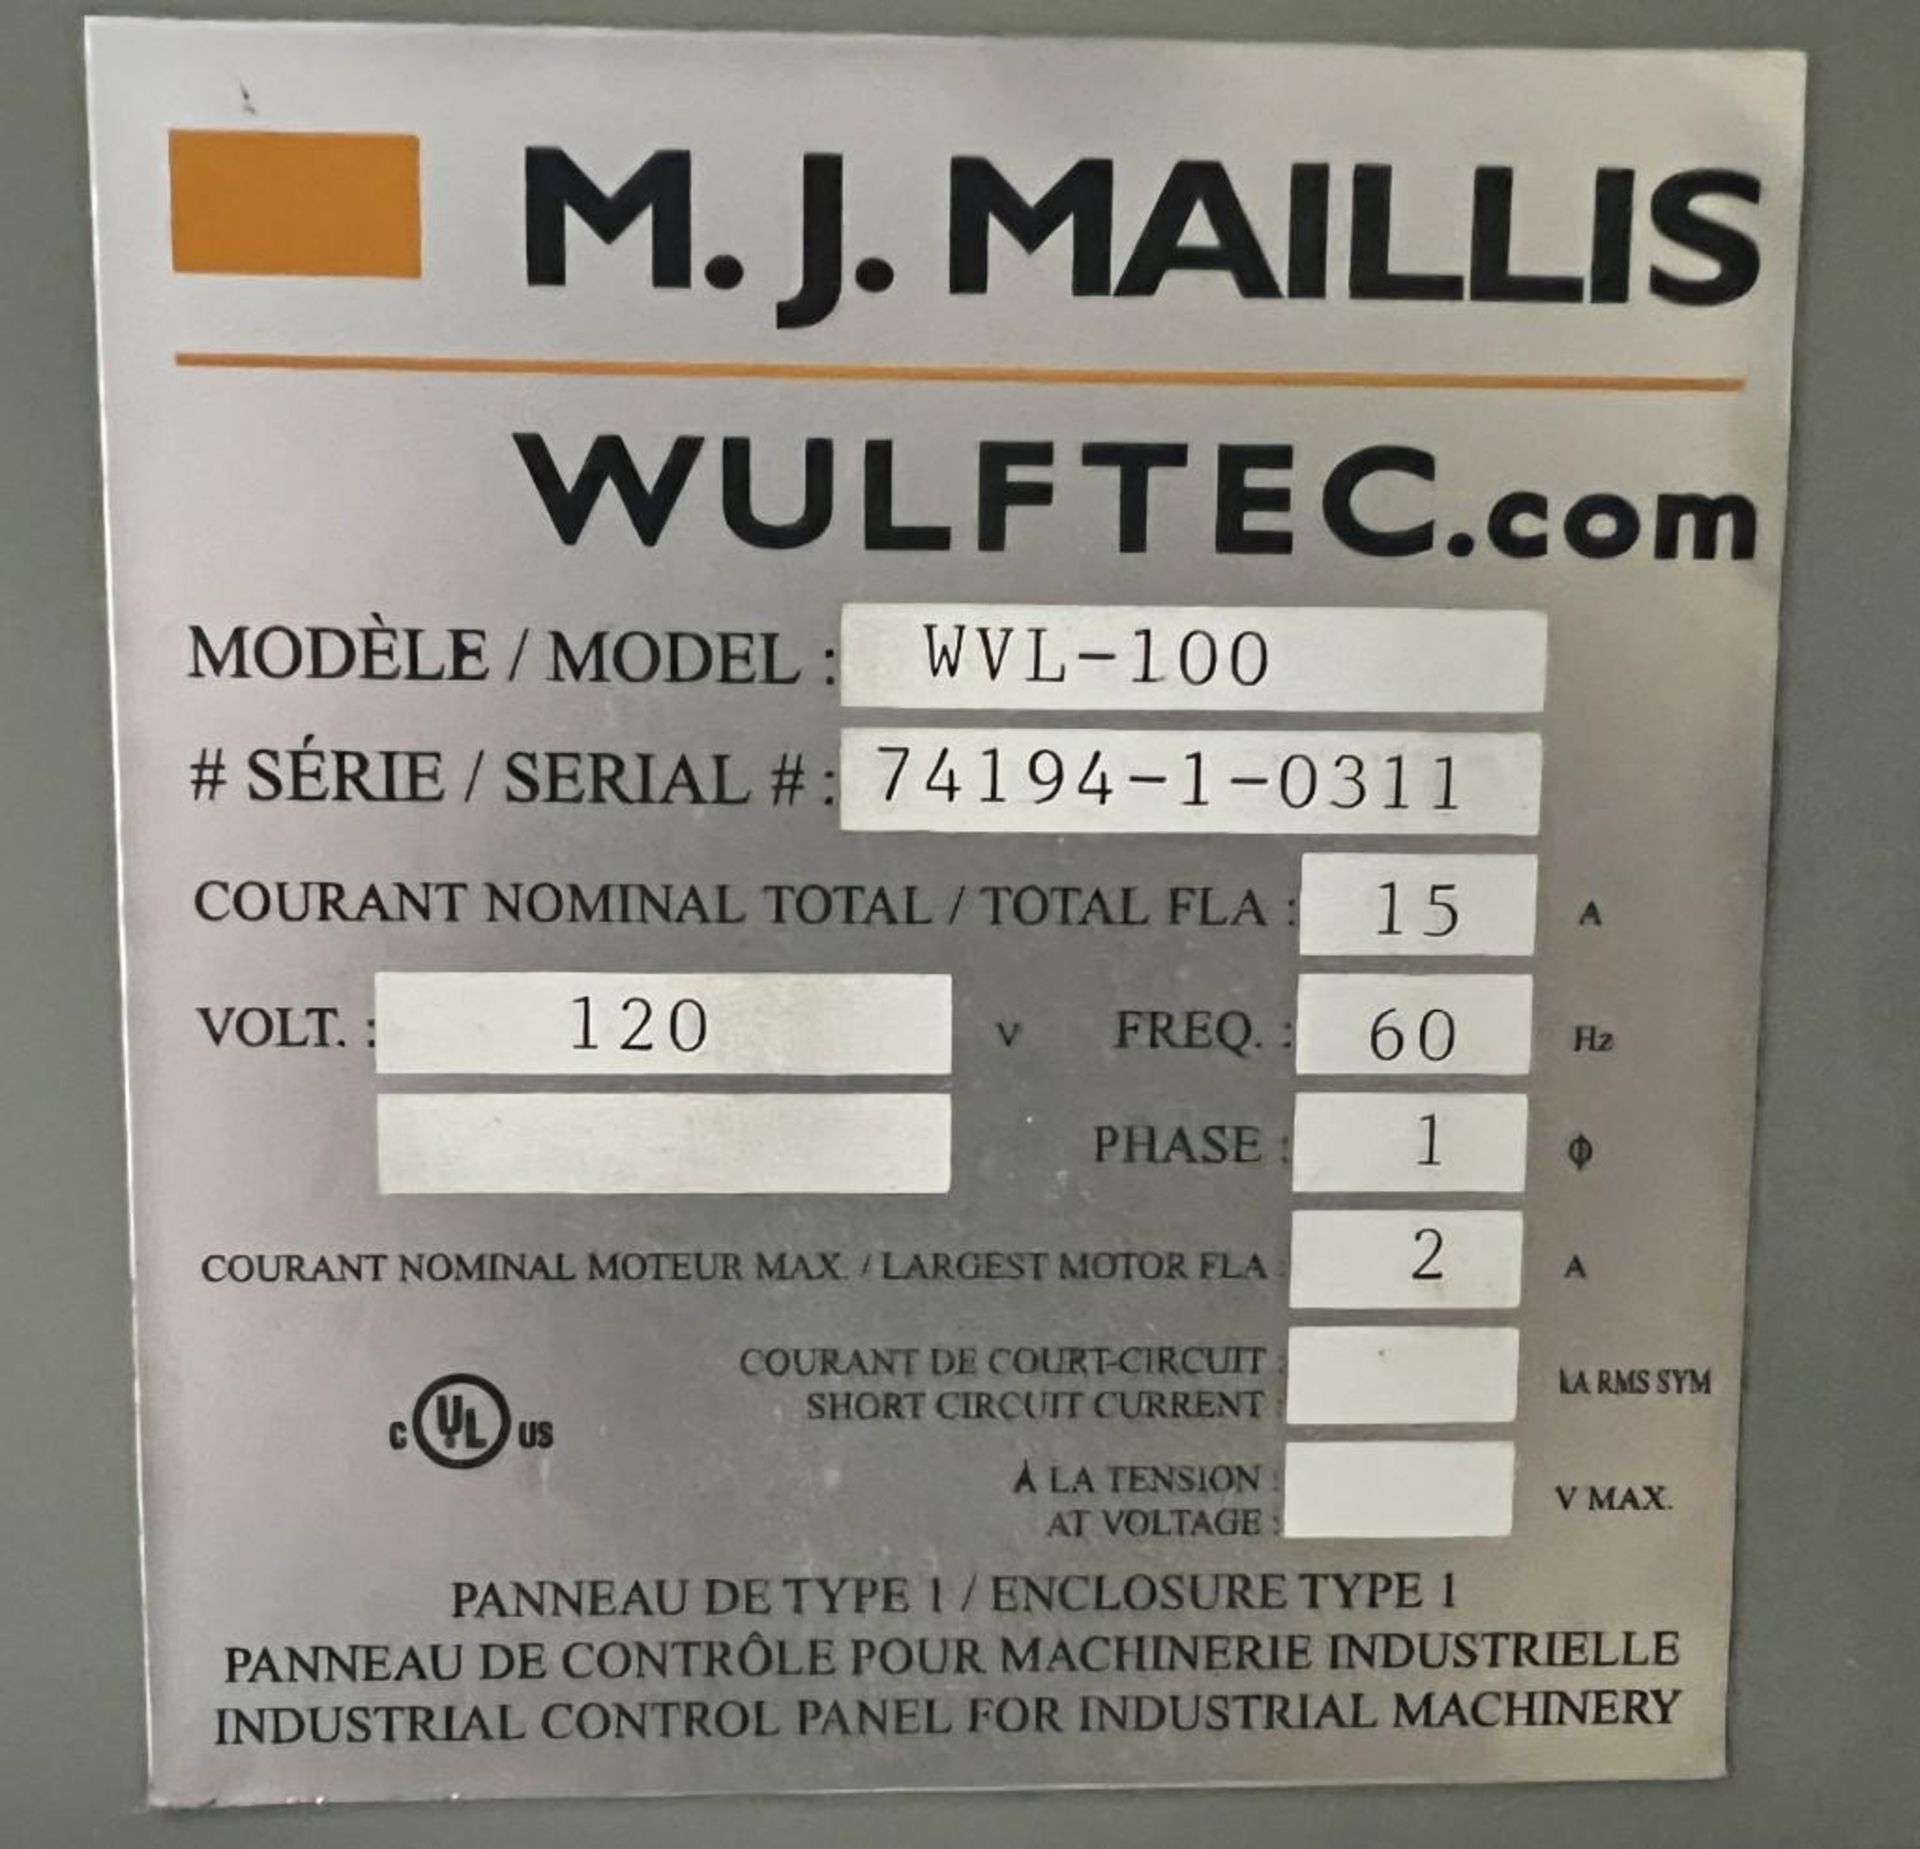 Wulftec Pallet Wrapper, Model WVL-100, Serial# 74194-1-0311. With 58" diameter turntable. - Image 9 of 9